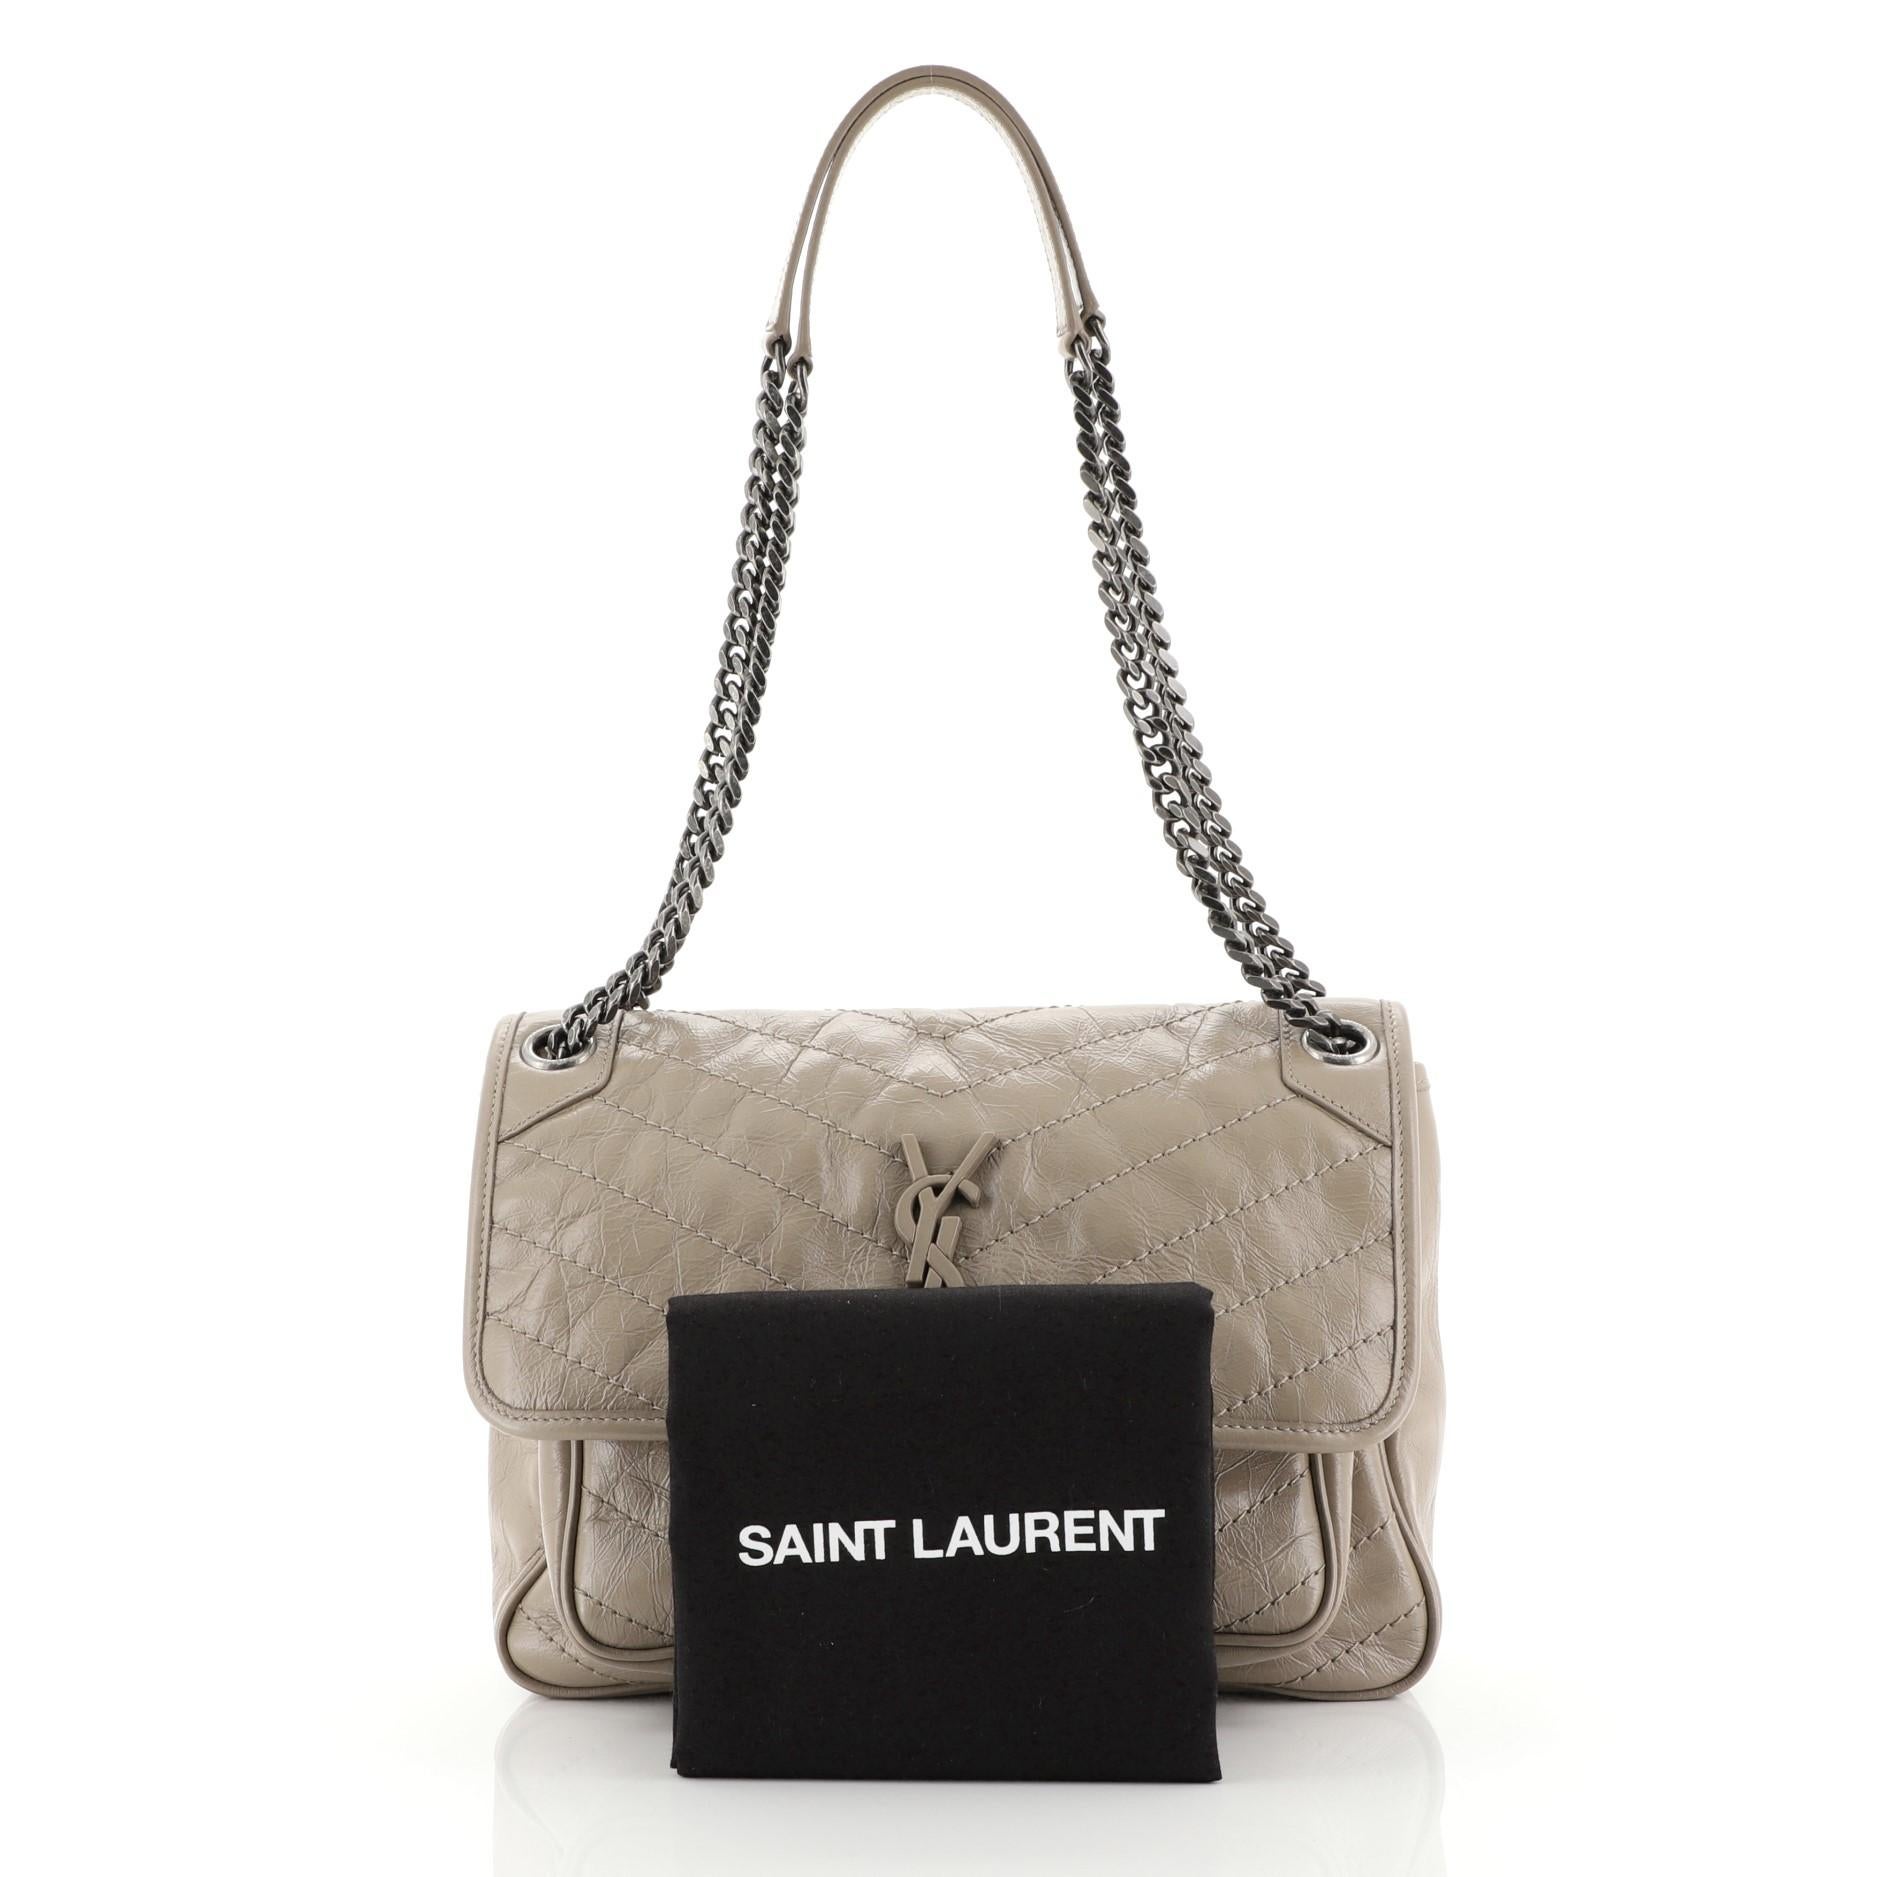 This Saint Laurent Niki Chain Flap Bag Matelasse Chevron Leather Medium, crafted in neutral matelasse chevron leather, features chain link shoulder straps with leather pads, frontal flap with YSL monogram detail, and aged silver-tone hardware. Its